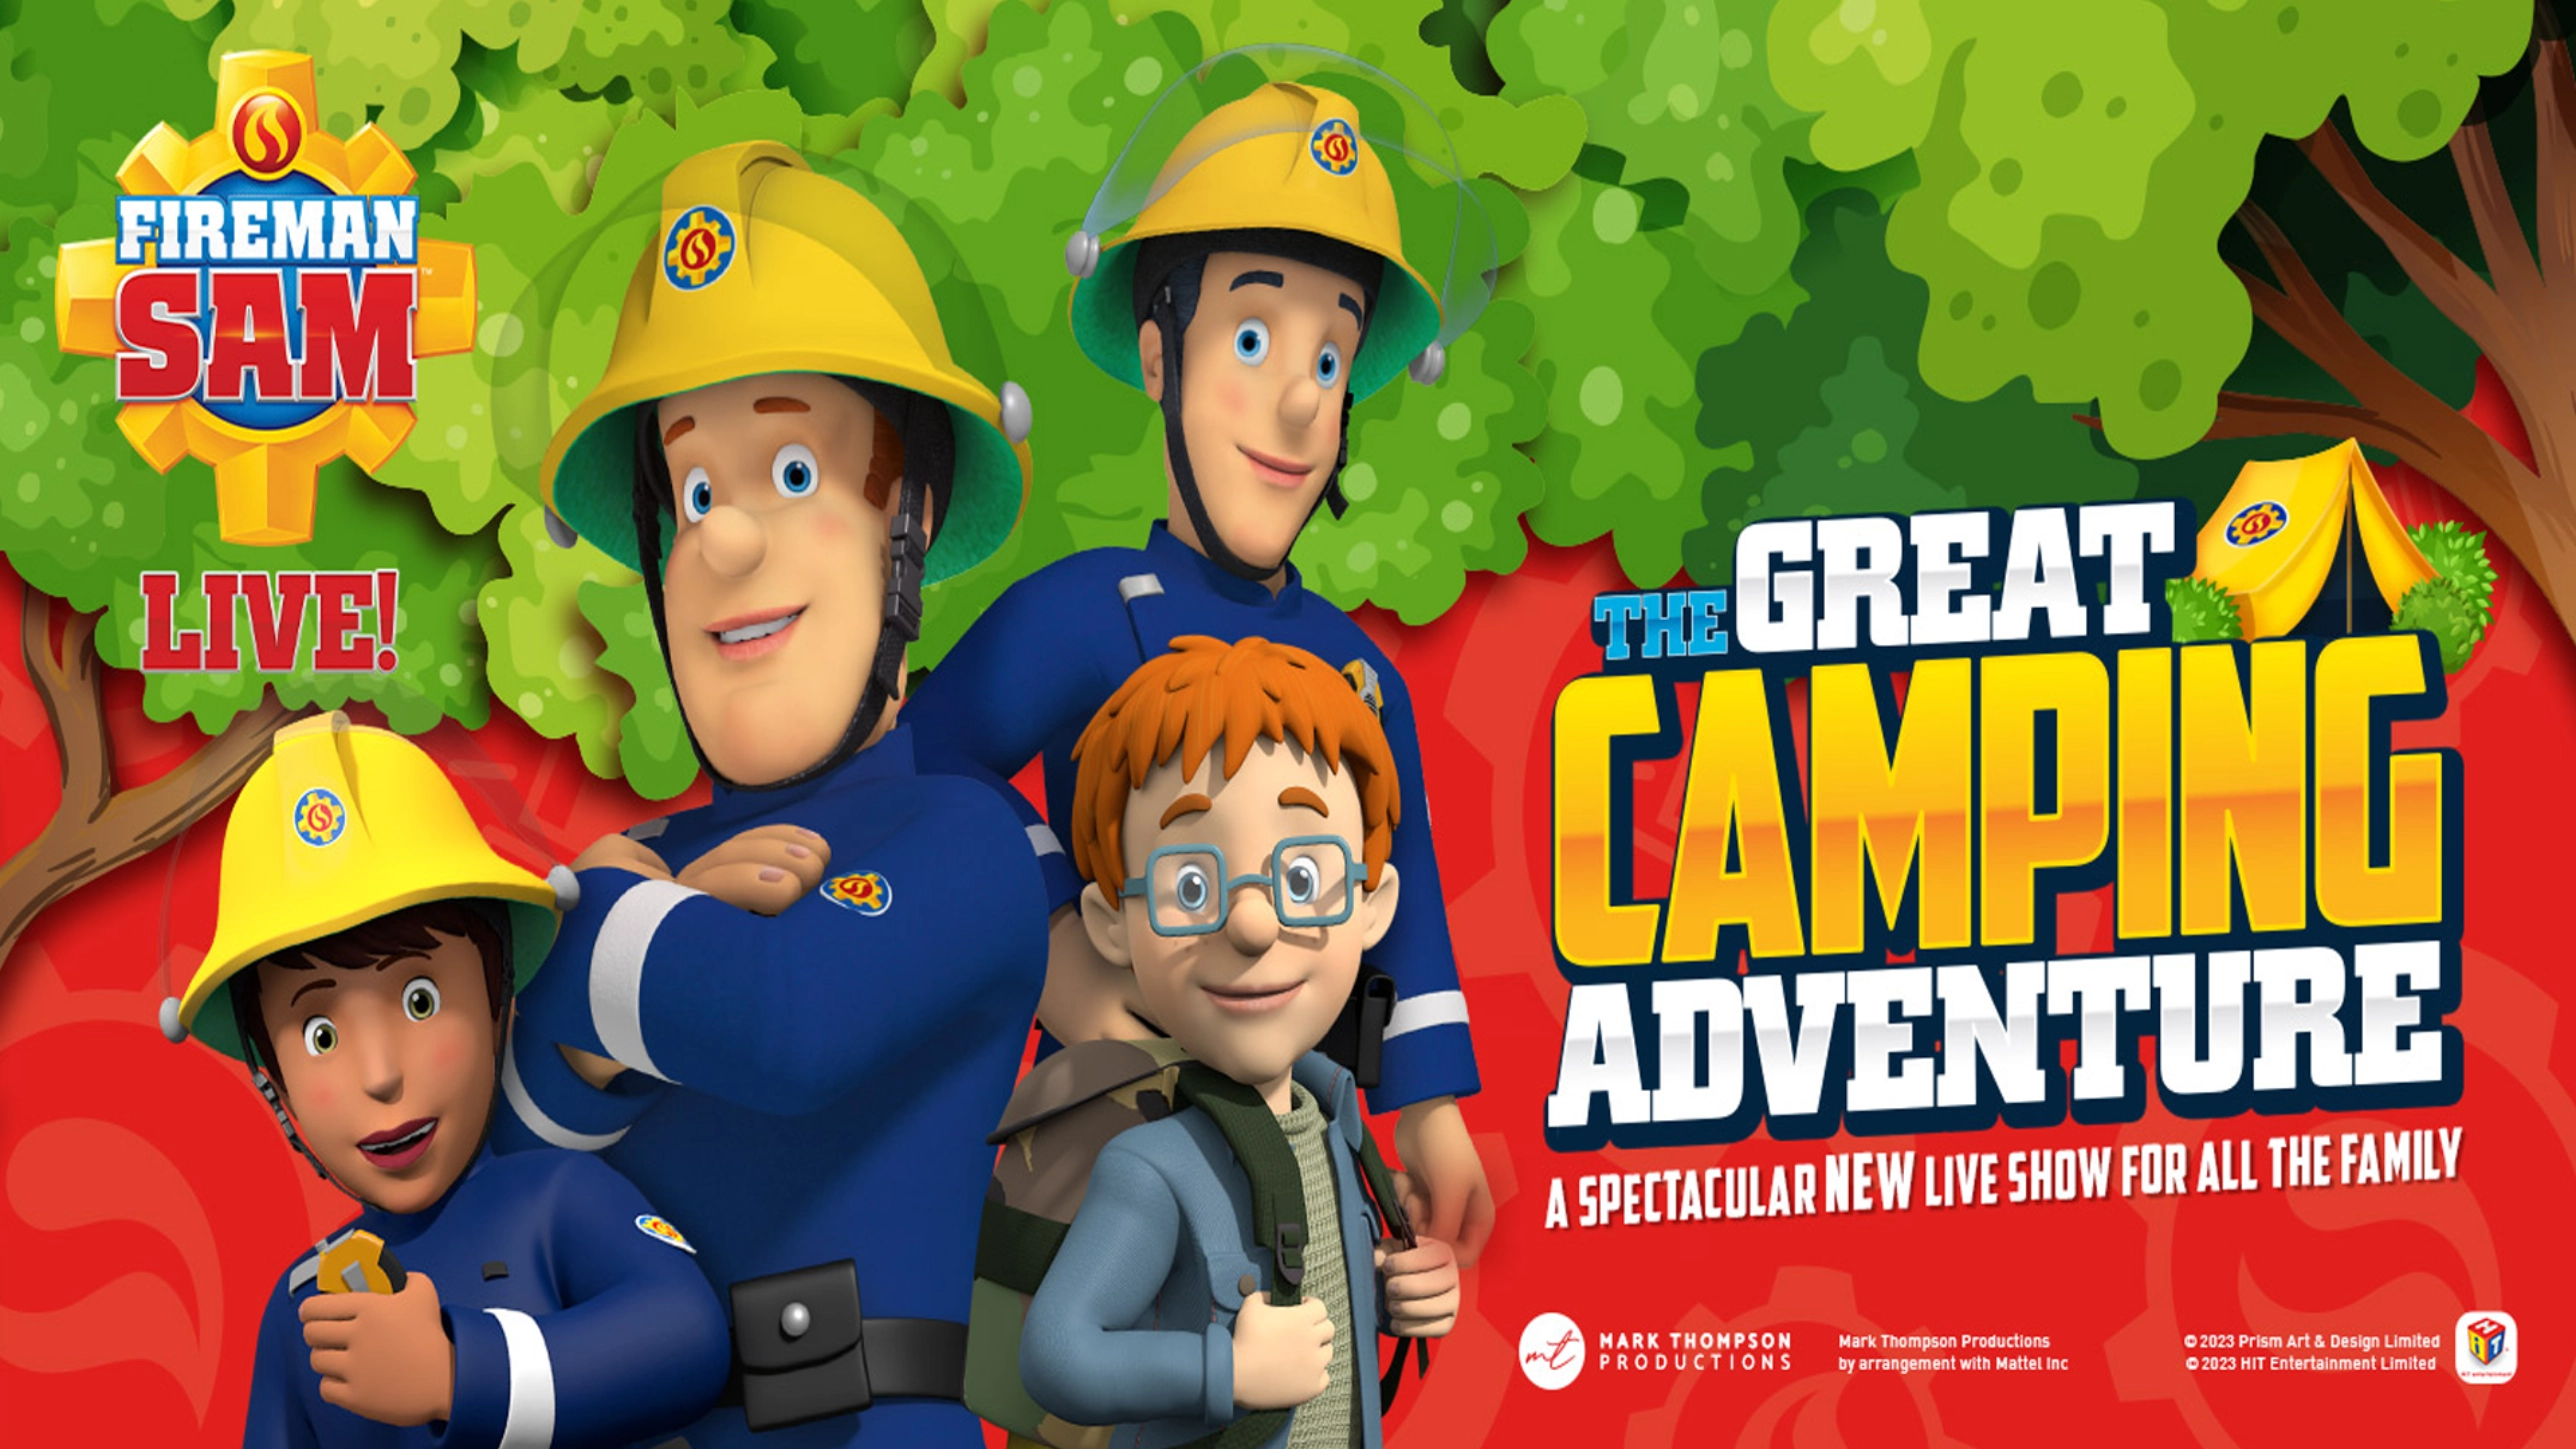 Fireman Sam Live! The Great Camping Adventure